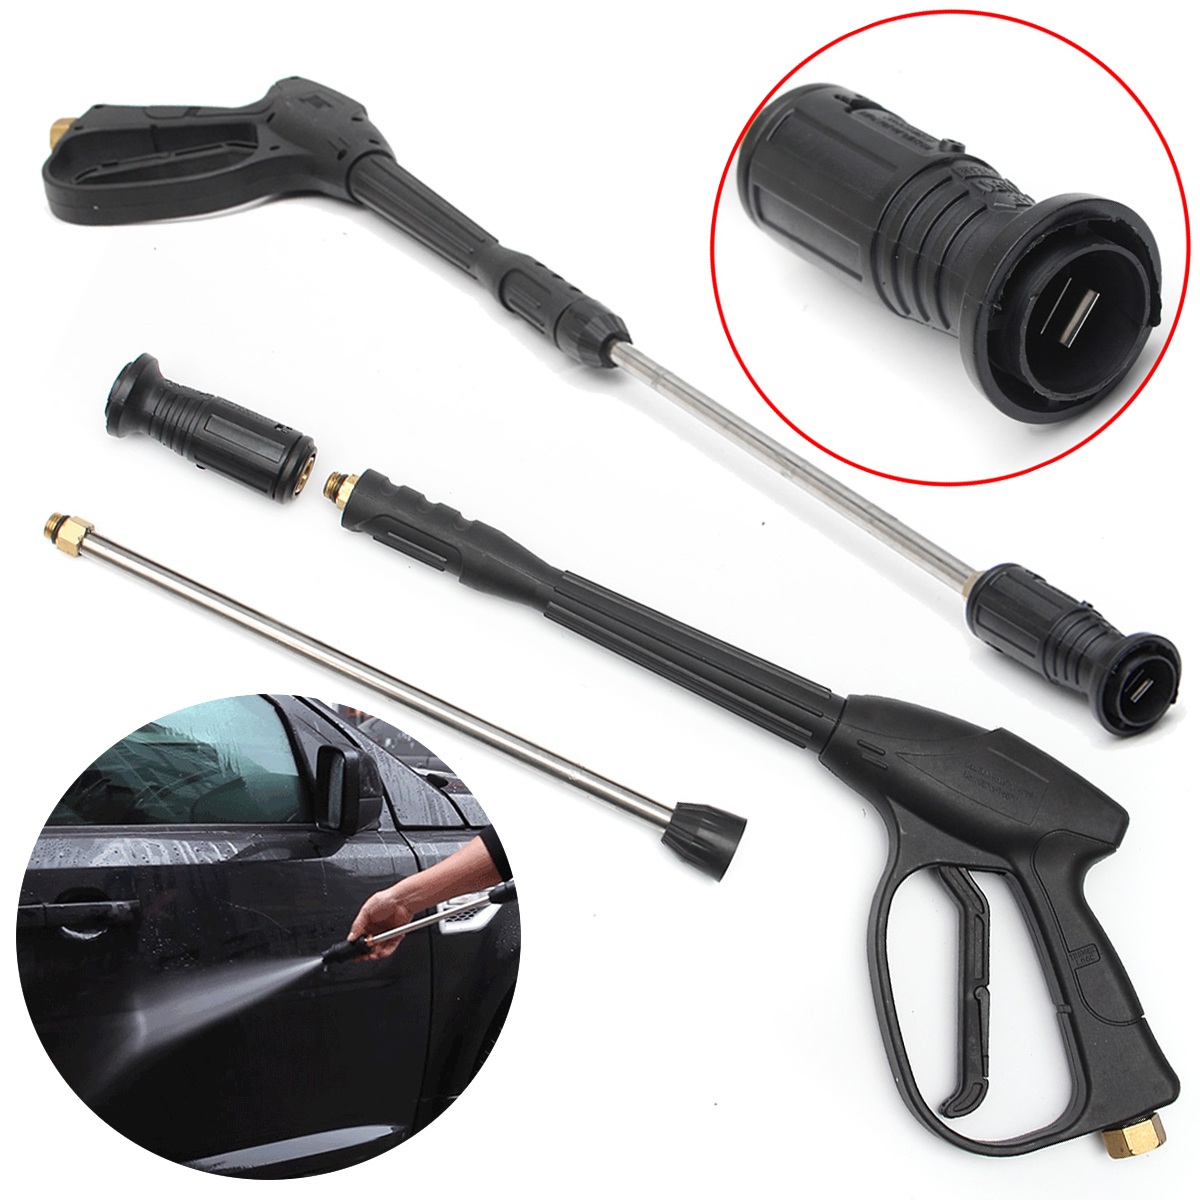 High-Pressure-Washer-Spray-Nozzle-Home-Water-Gun-With-Extension-Rod-1170153-1